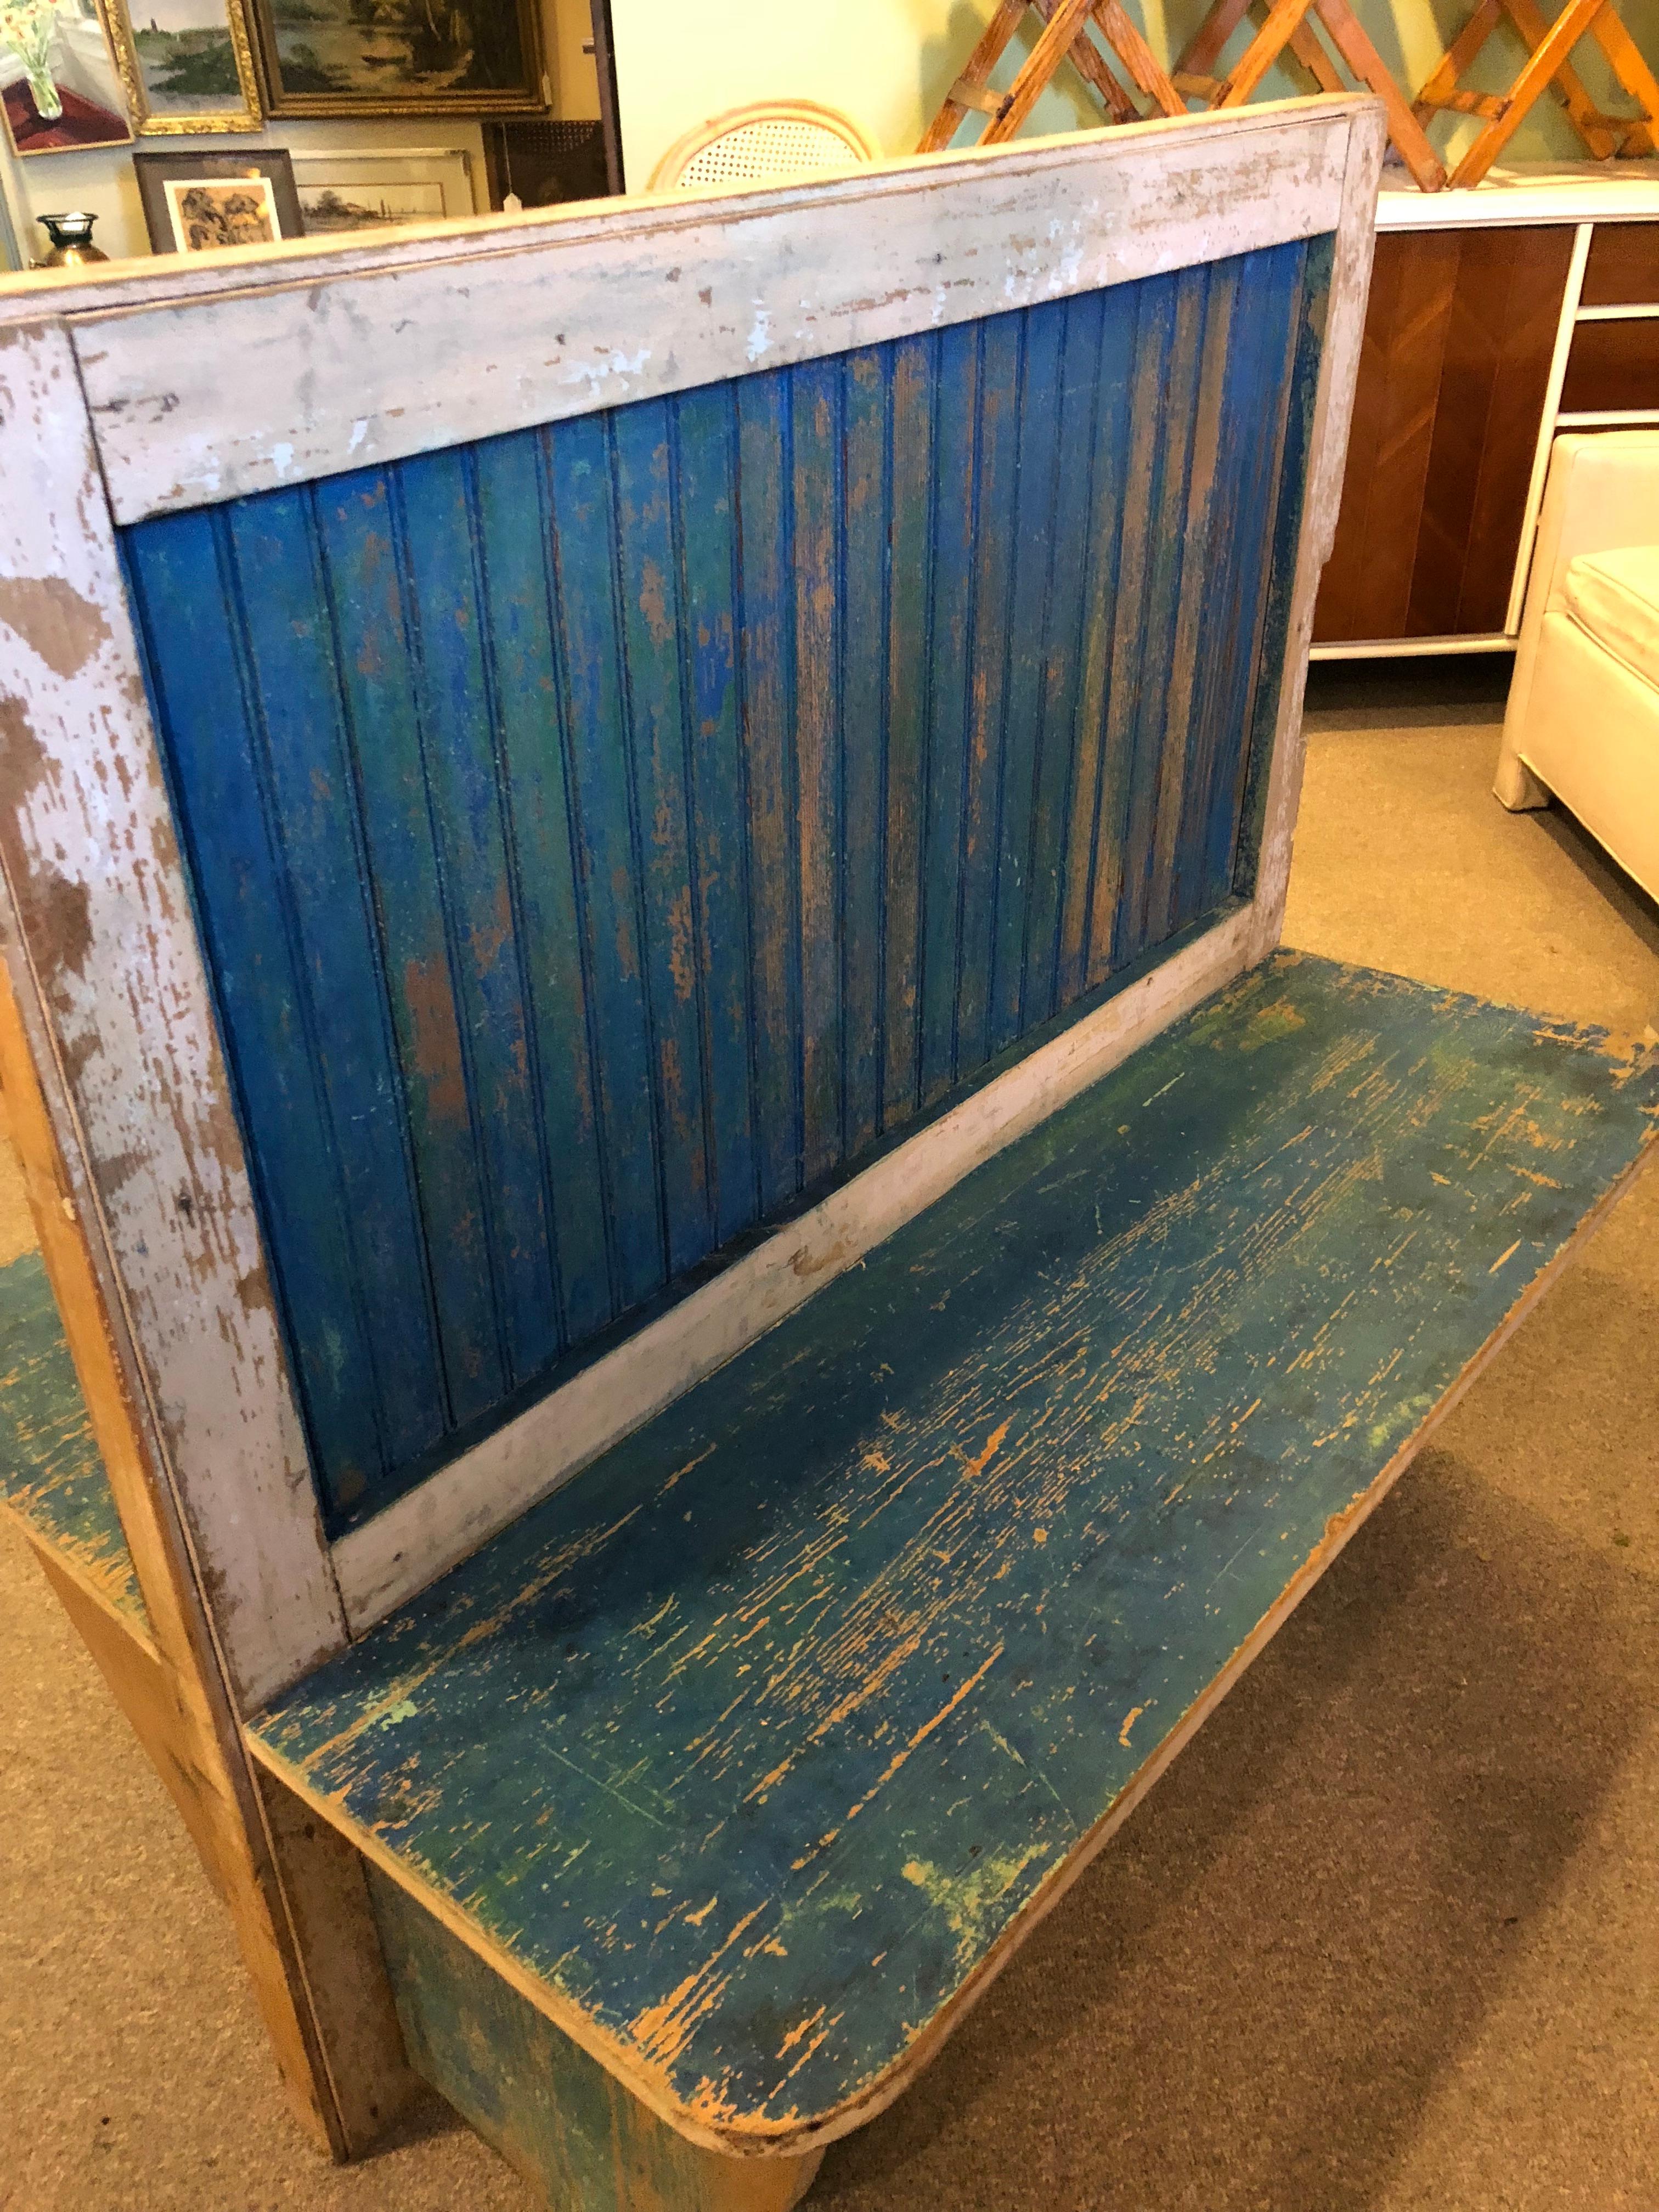 Bench from Train Depot, circa 1900s, 2 Sided with Original Blue Paint (Gemalt)